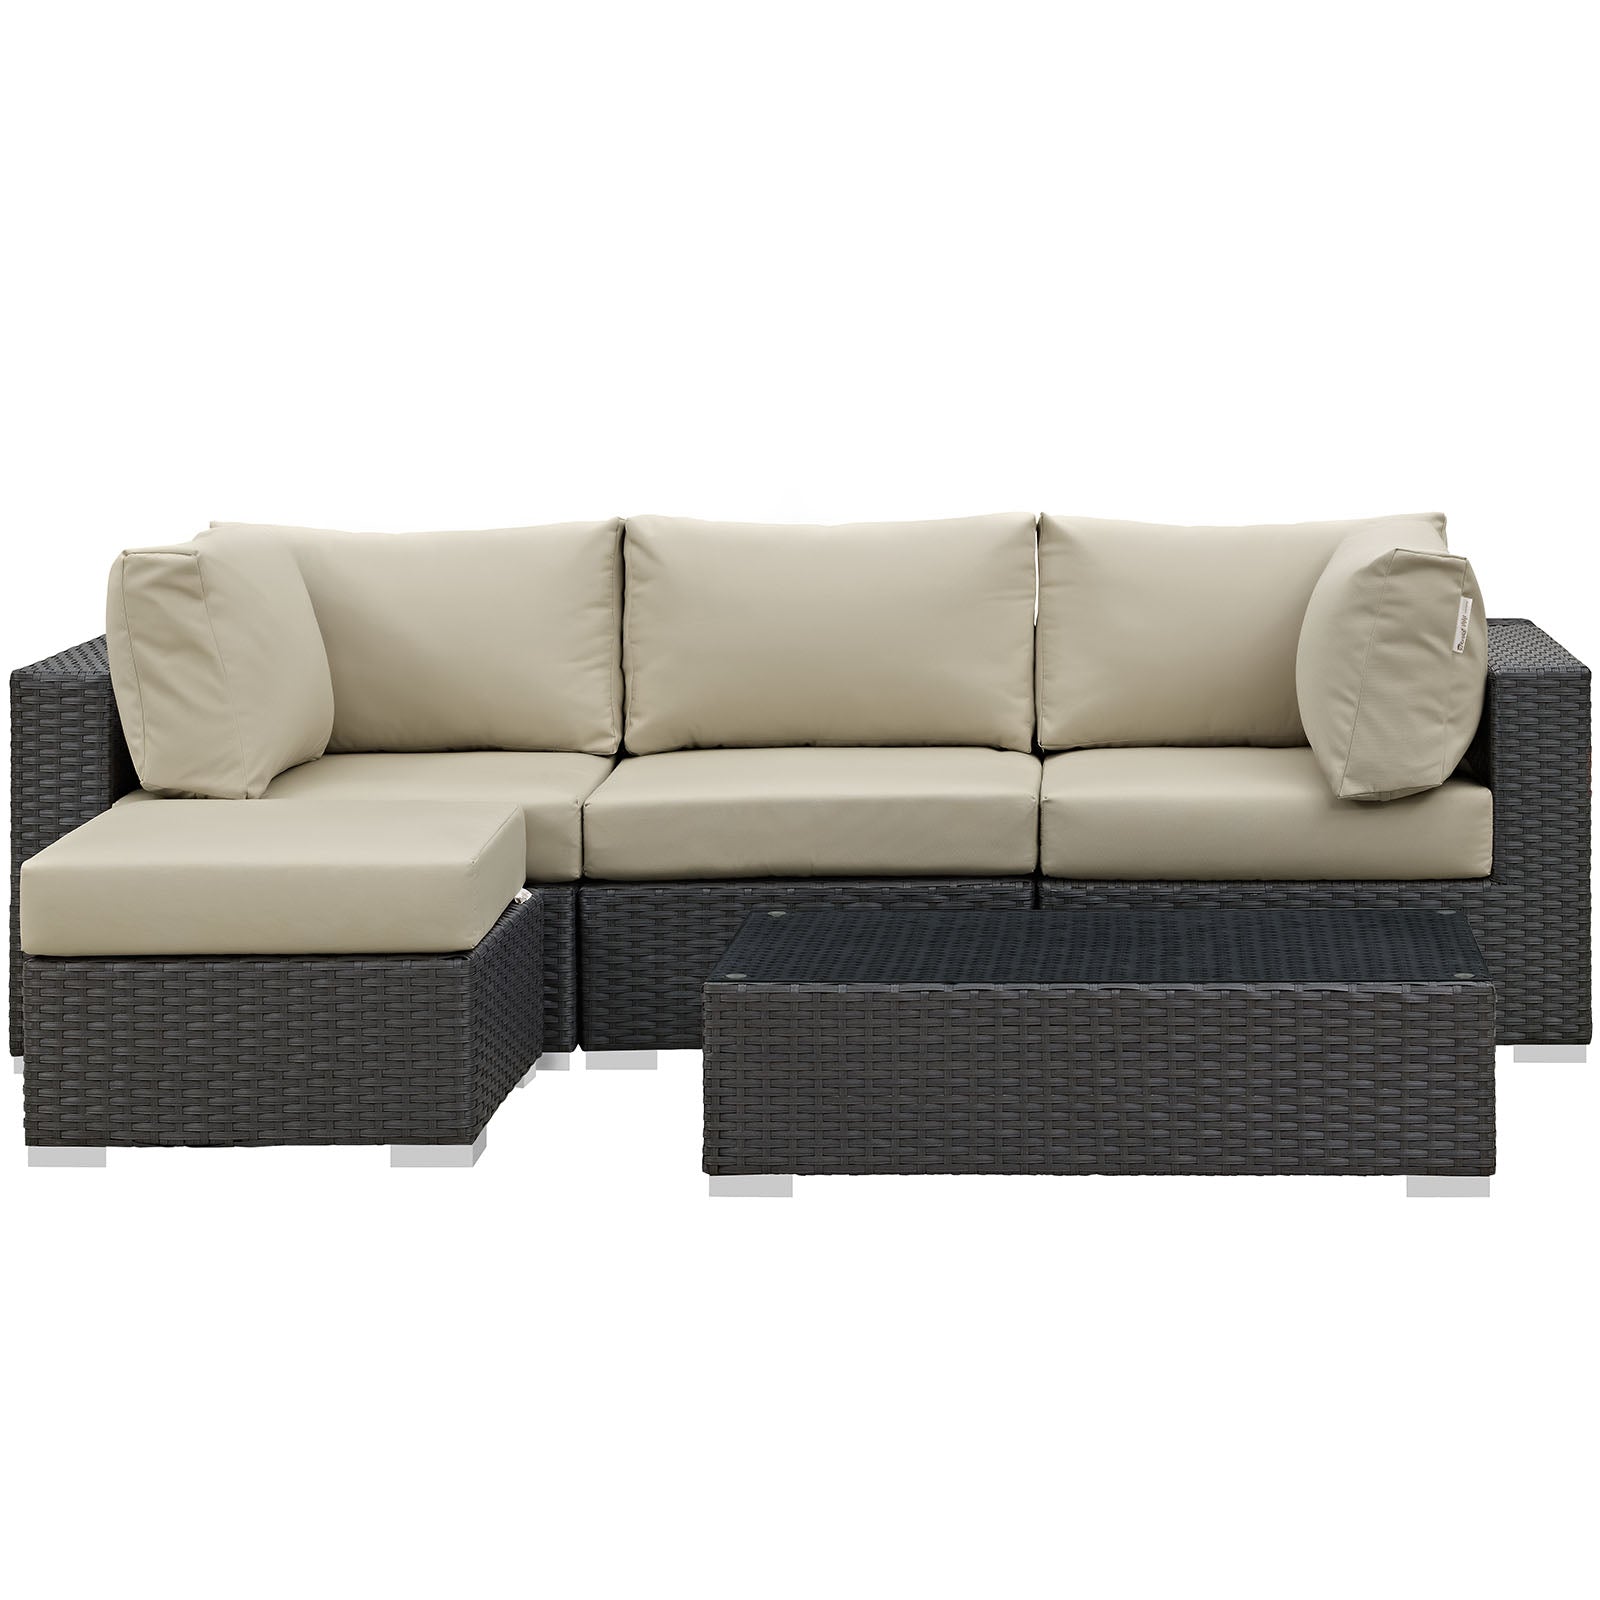 Sojourn 5 Piece Outdoor Patio Sunbrella® Sectional Set - East Shore Modern Home Furnishings